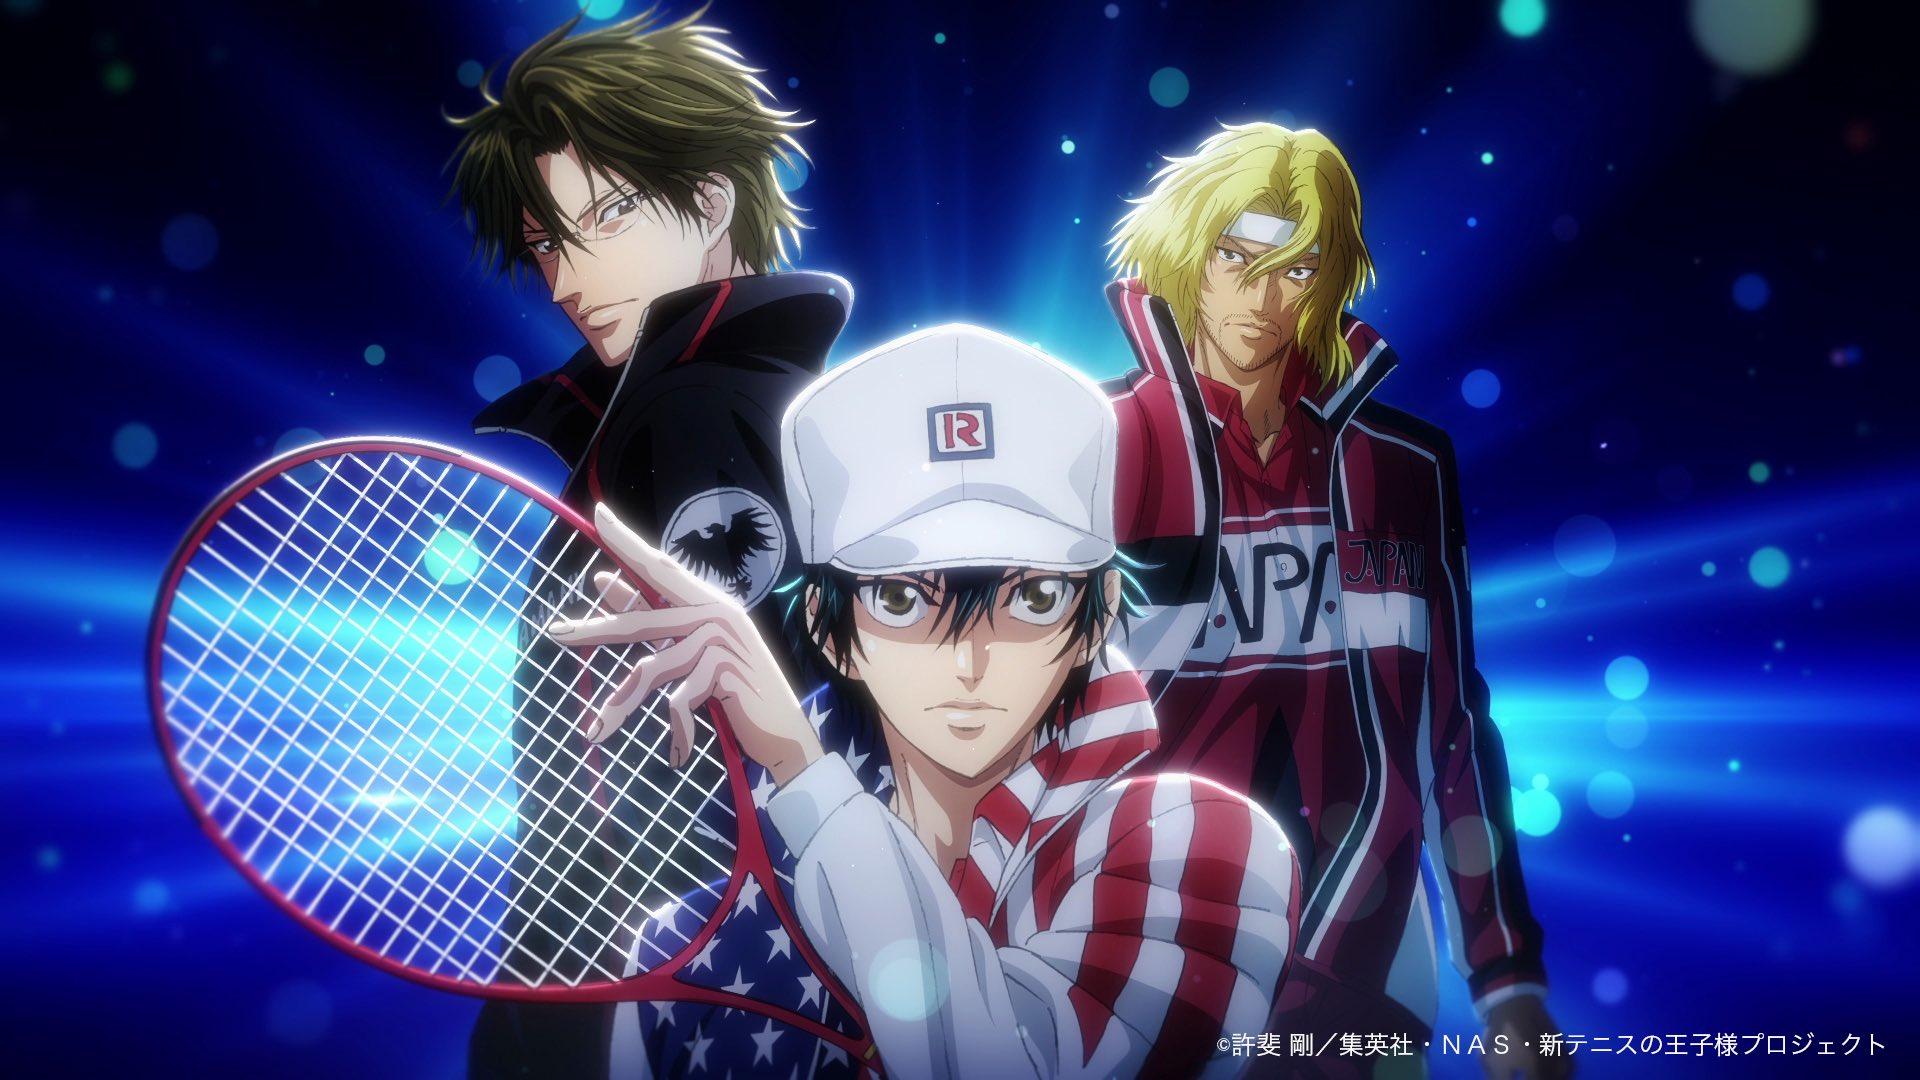 3rd Prince of Tennis Best Games Volume's Promo Video Previews Ending Song -  News - Anime News Network